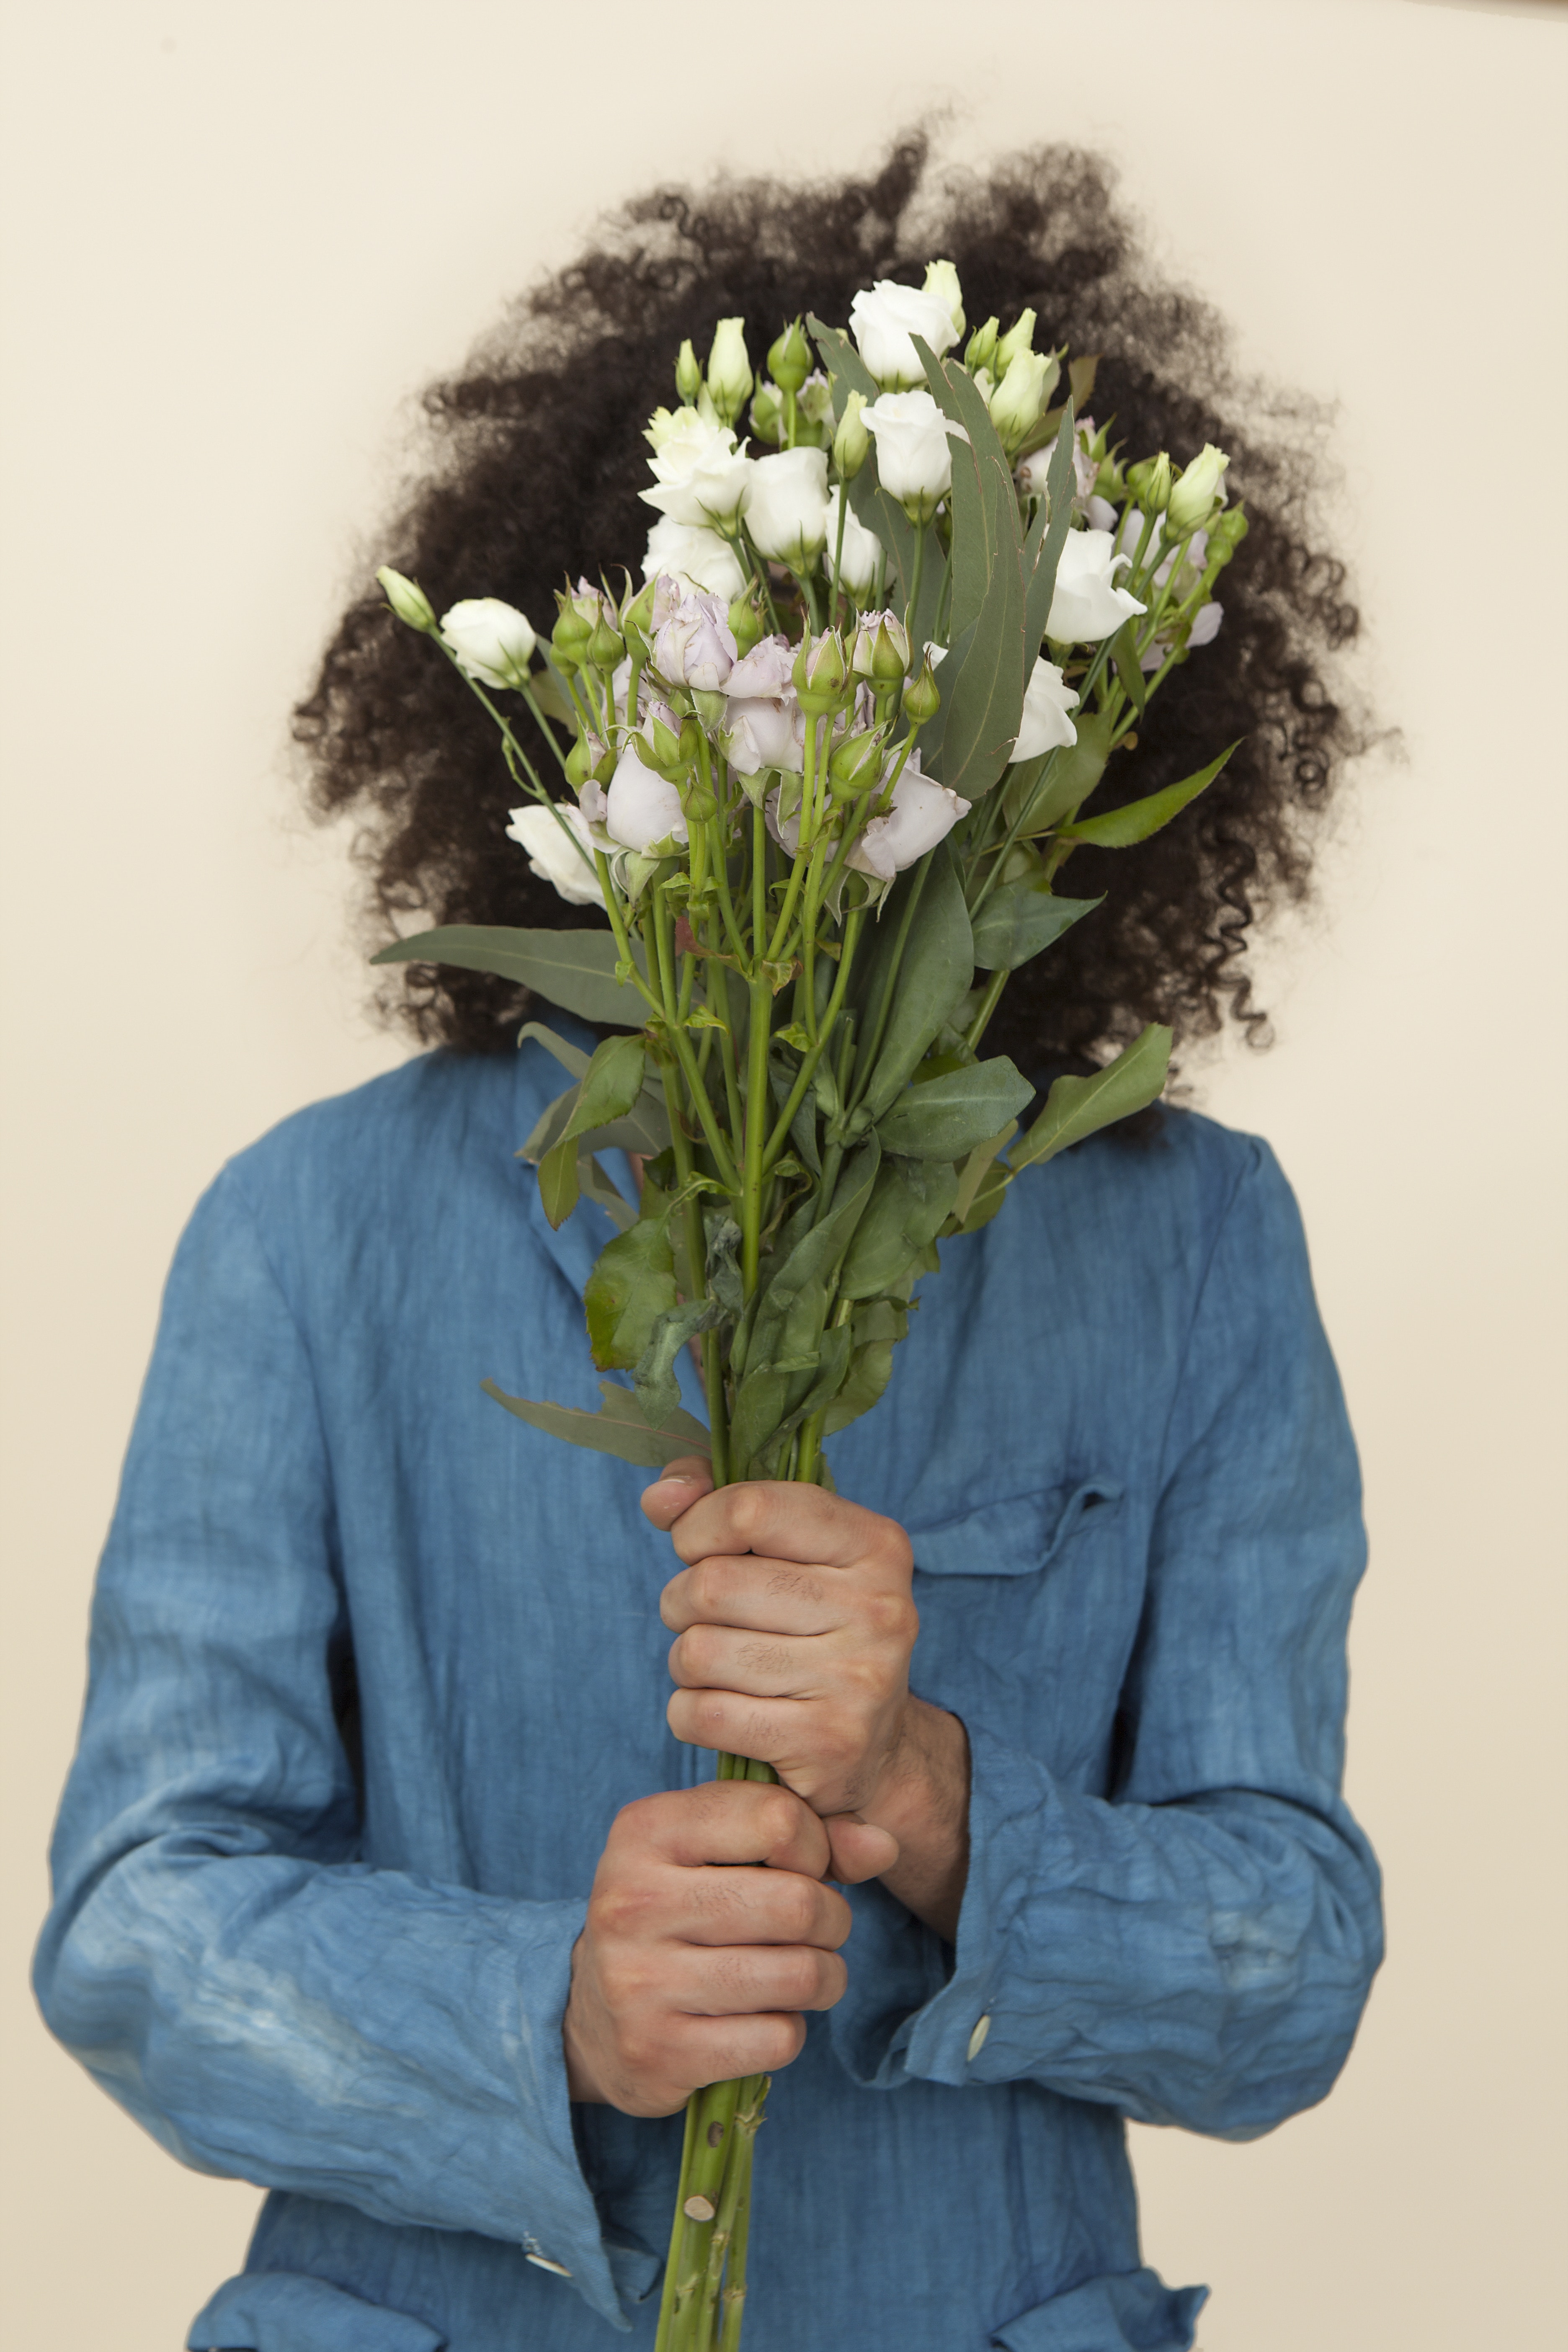 A person holding white a flower bouquet covering the face